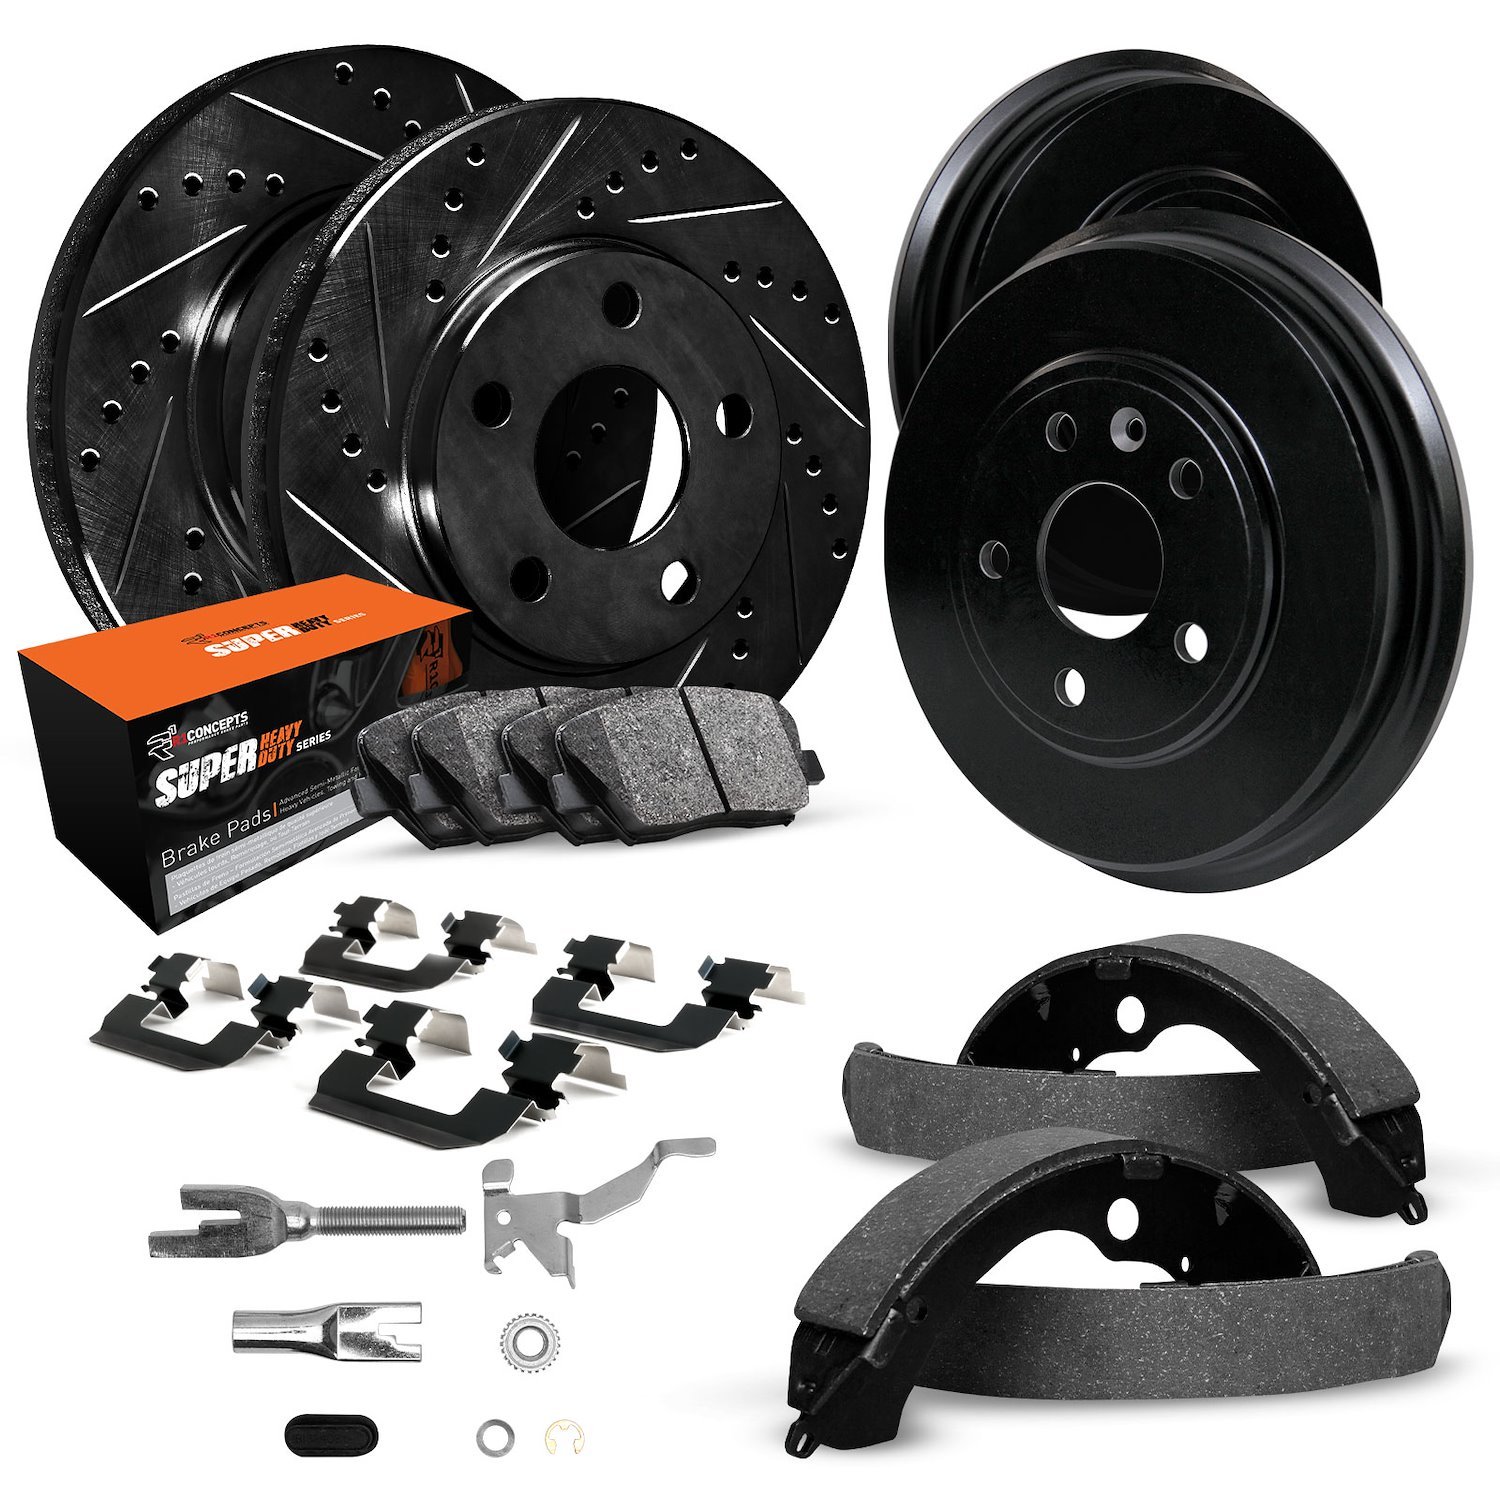 E-Line Drilled/Slotted Black Rotor & Drum Set w/Super-Duty Pads, Shoes, Hardware/Adjusters, 1997-2004 Ford/Lincoln/Mercury/Mazda